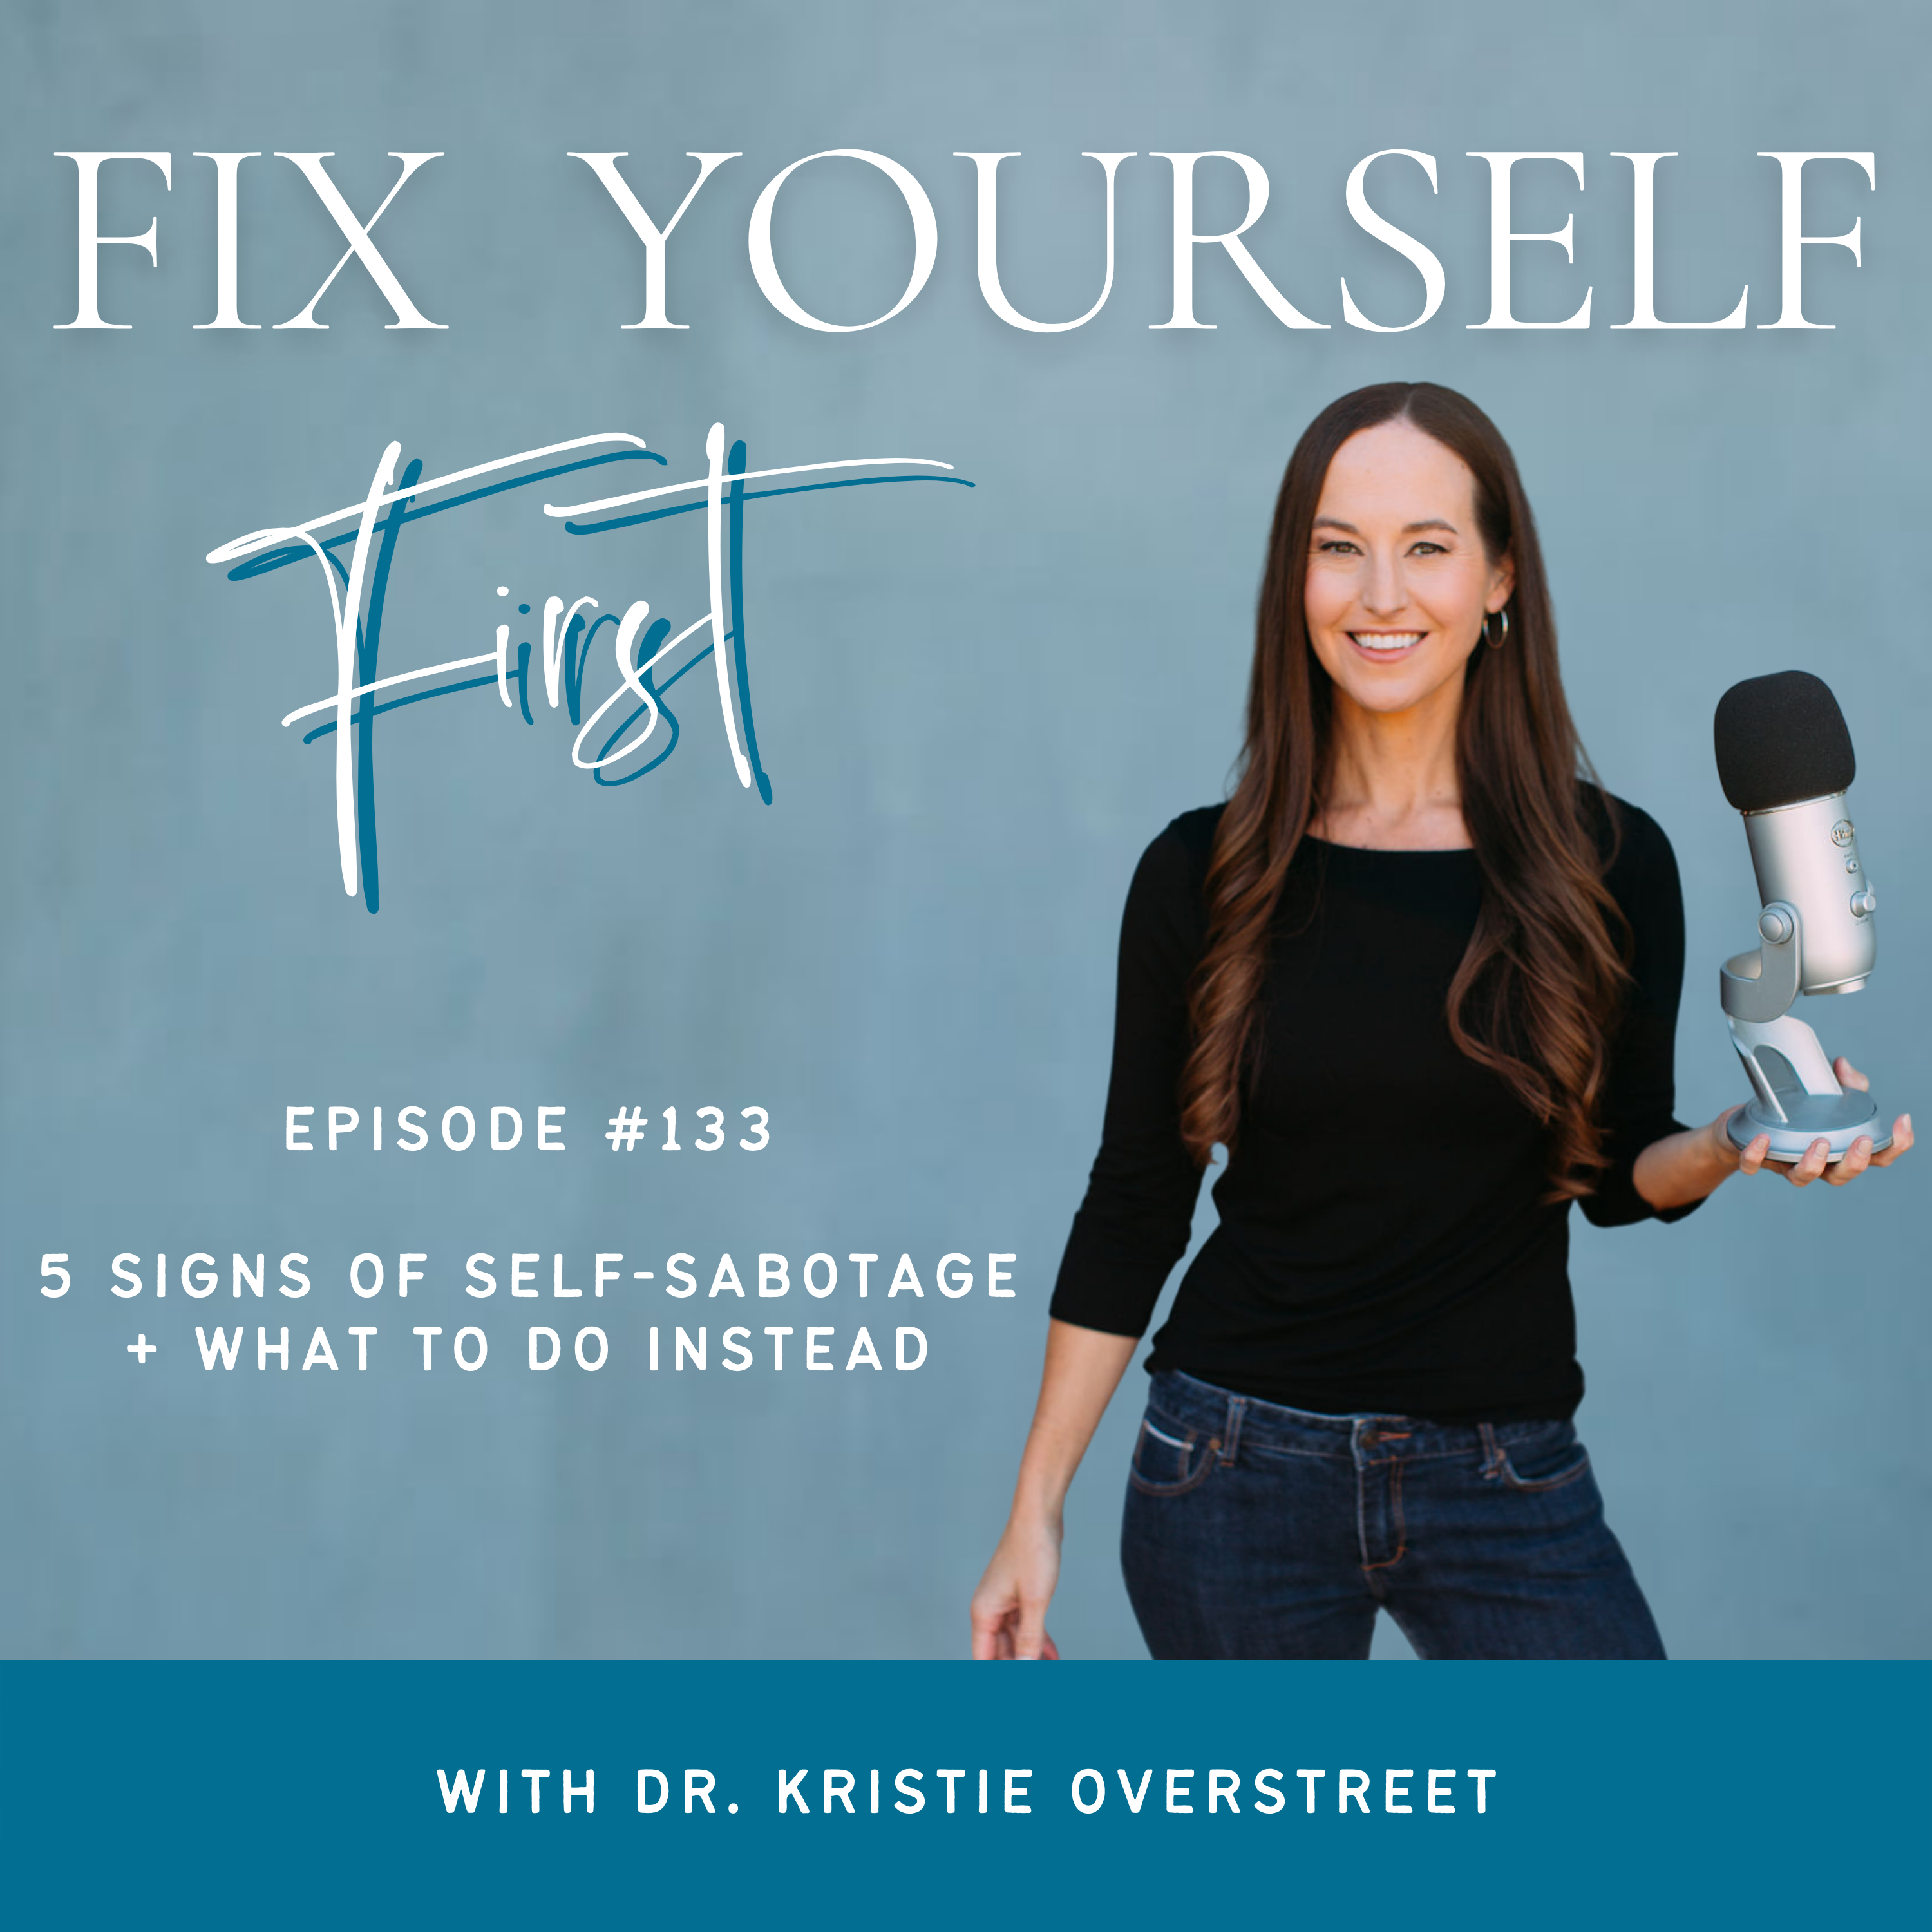 Fix Yourself First Episode 133 5 Signs of Self-Sabotage + What to Do Instead